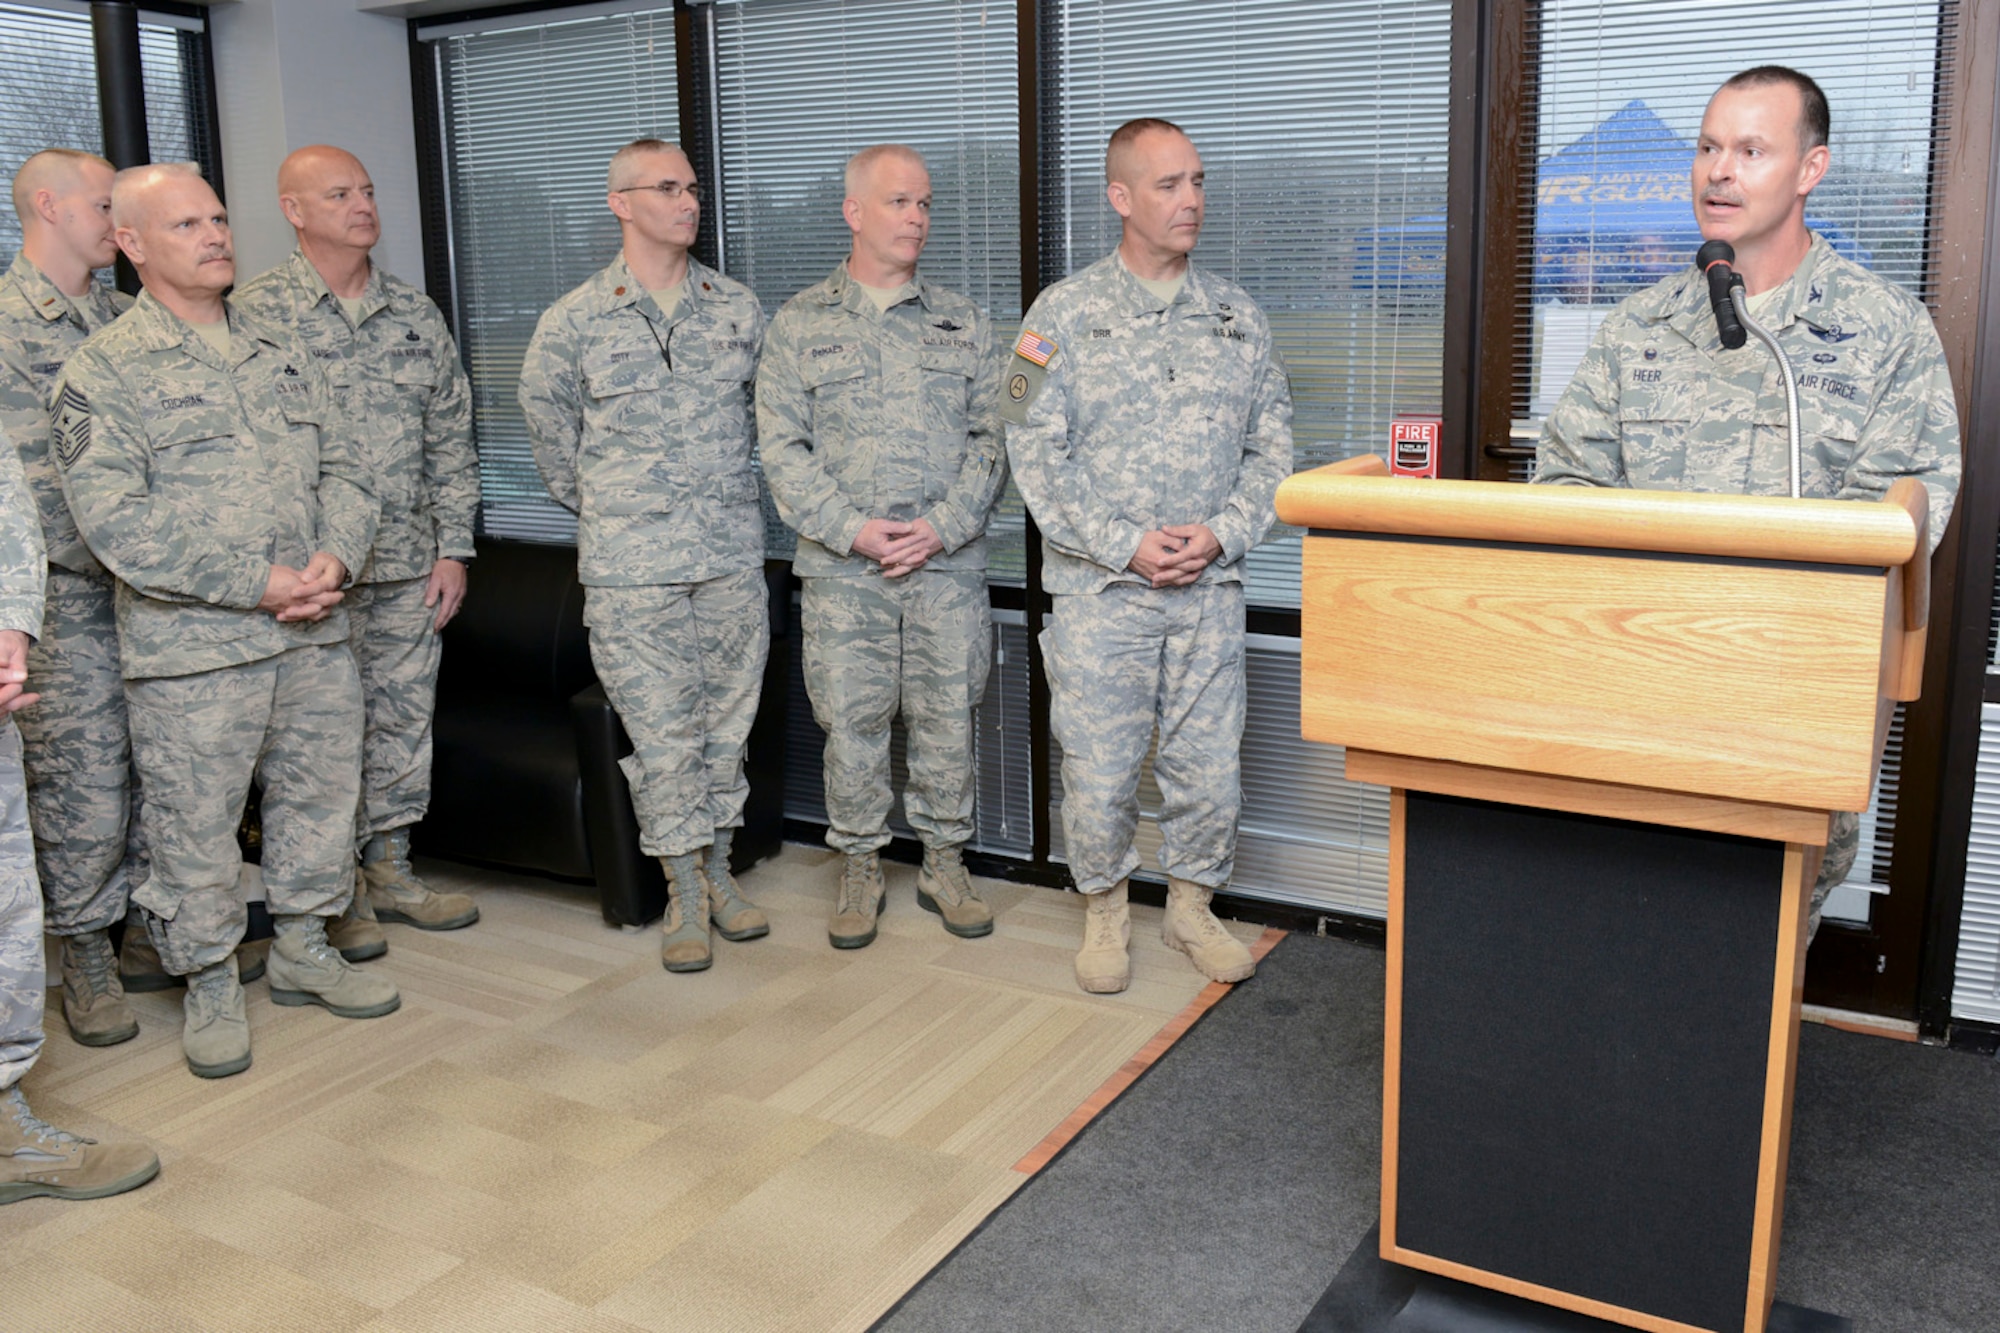 132d Wing (132WG) Commander, Col. Kevin Heer (podium), speaks to members of the Iowa Air and Army National Guard as they celebrate the opening of the 132WG, Des Moines, Iowa off-site Recruiting Operation Center during a ribbon cutting ceremony held at the new Recruiting Operation Center in West Des Moines, Iowa on Tuesday, March 24, 2015.  (U.S. Air National Guard photo by Staff Sgt. Linda K. Burger/Released)